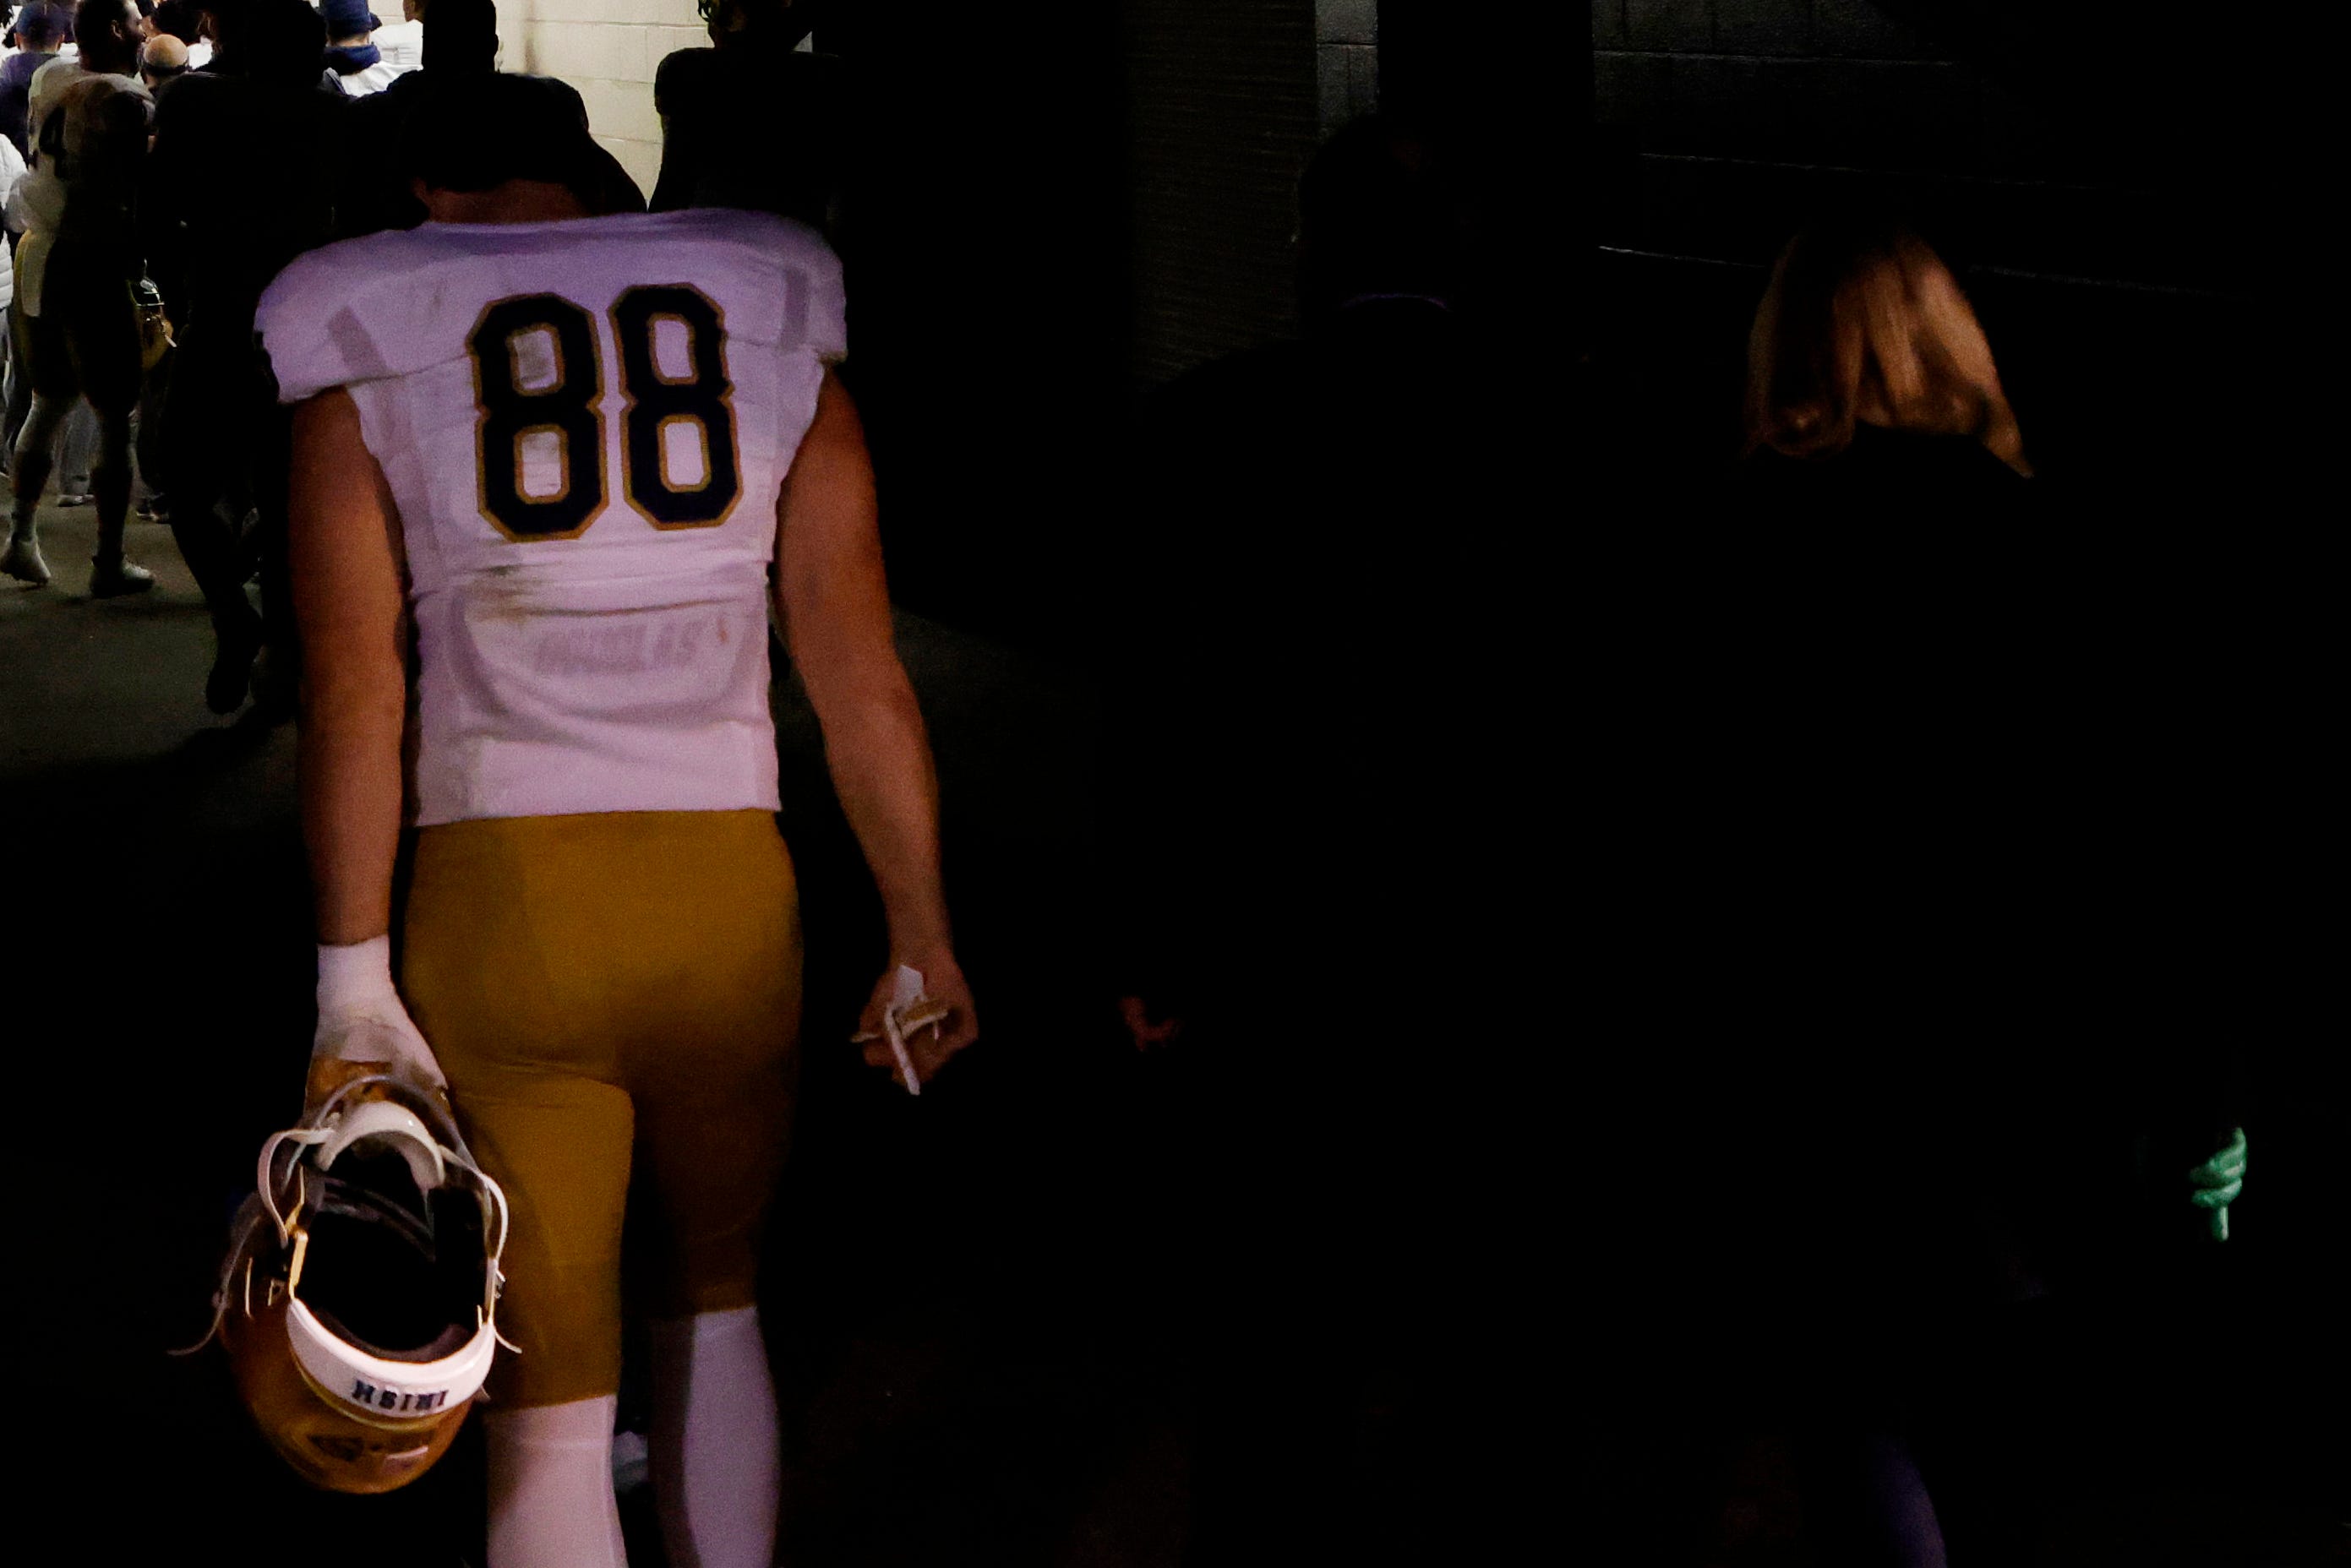 Nov 13, 2021; Charlottesville, Virginia, USA; Notre Dame Fighting Irish tight end Mitchell Evans (88) walks into the tunnel after the game against the against the Virginia Cavaliers at Scott Stadium. Mandatory Credit: Geoff Burke-USA TODAY Sports